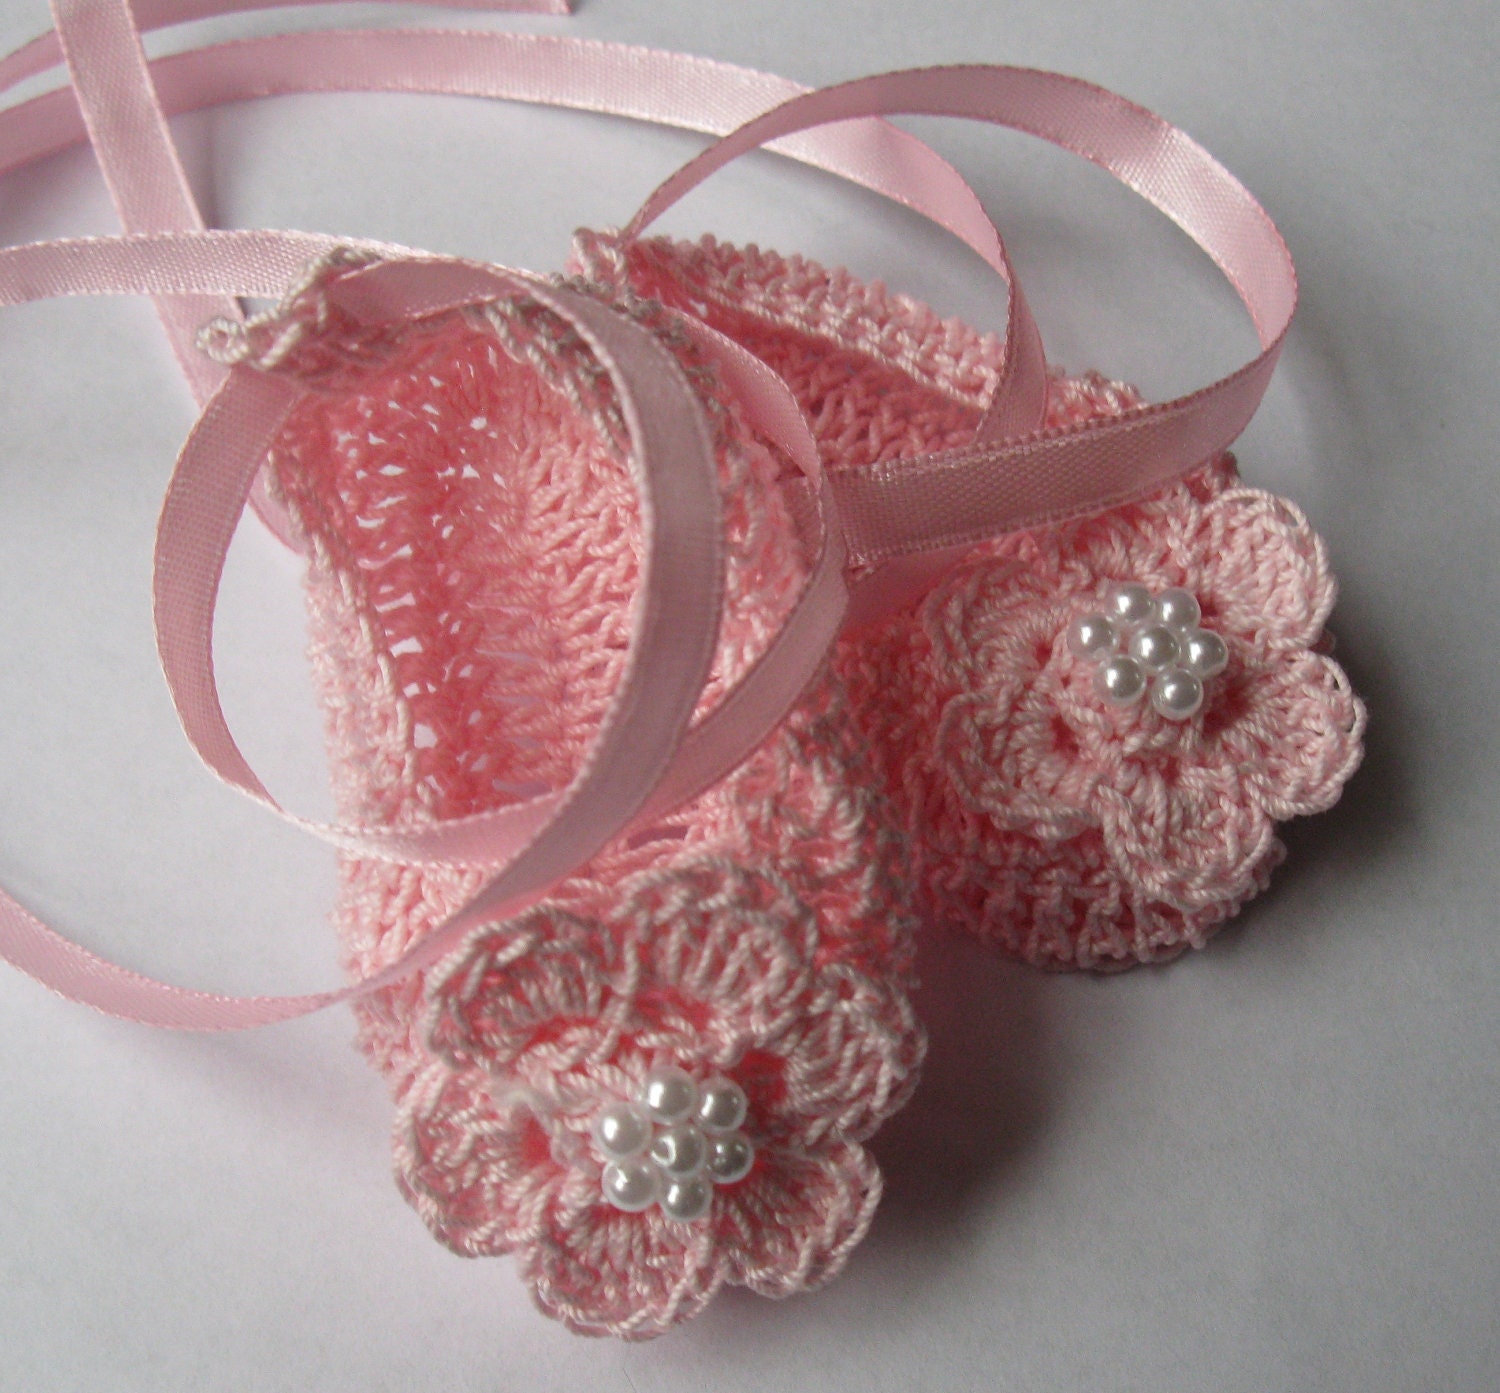 Crocheted Newborn Baby Booties Infant Crib Shoes by babycrochets